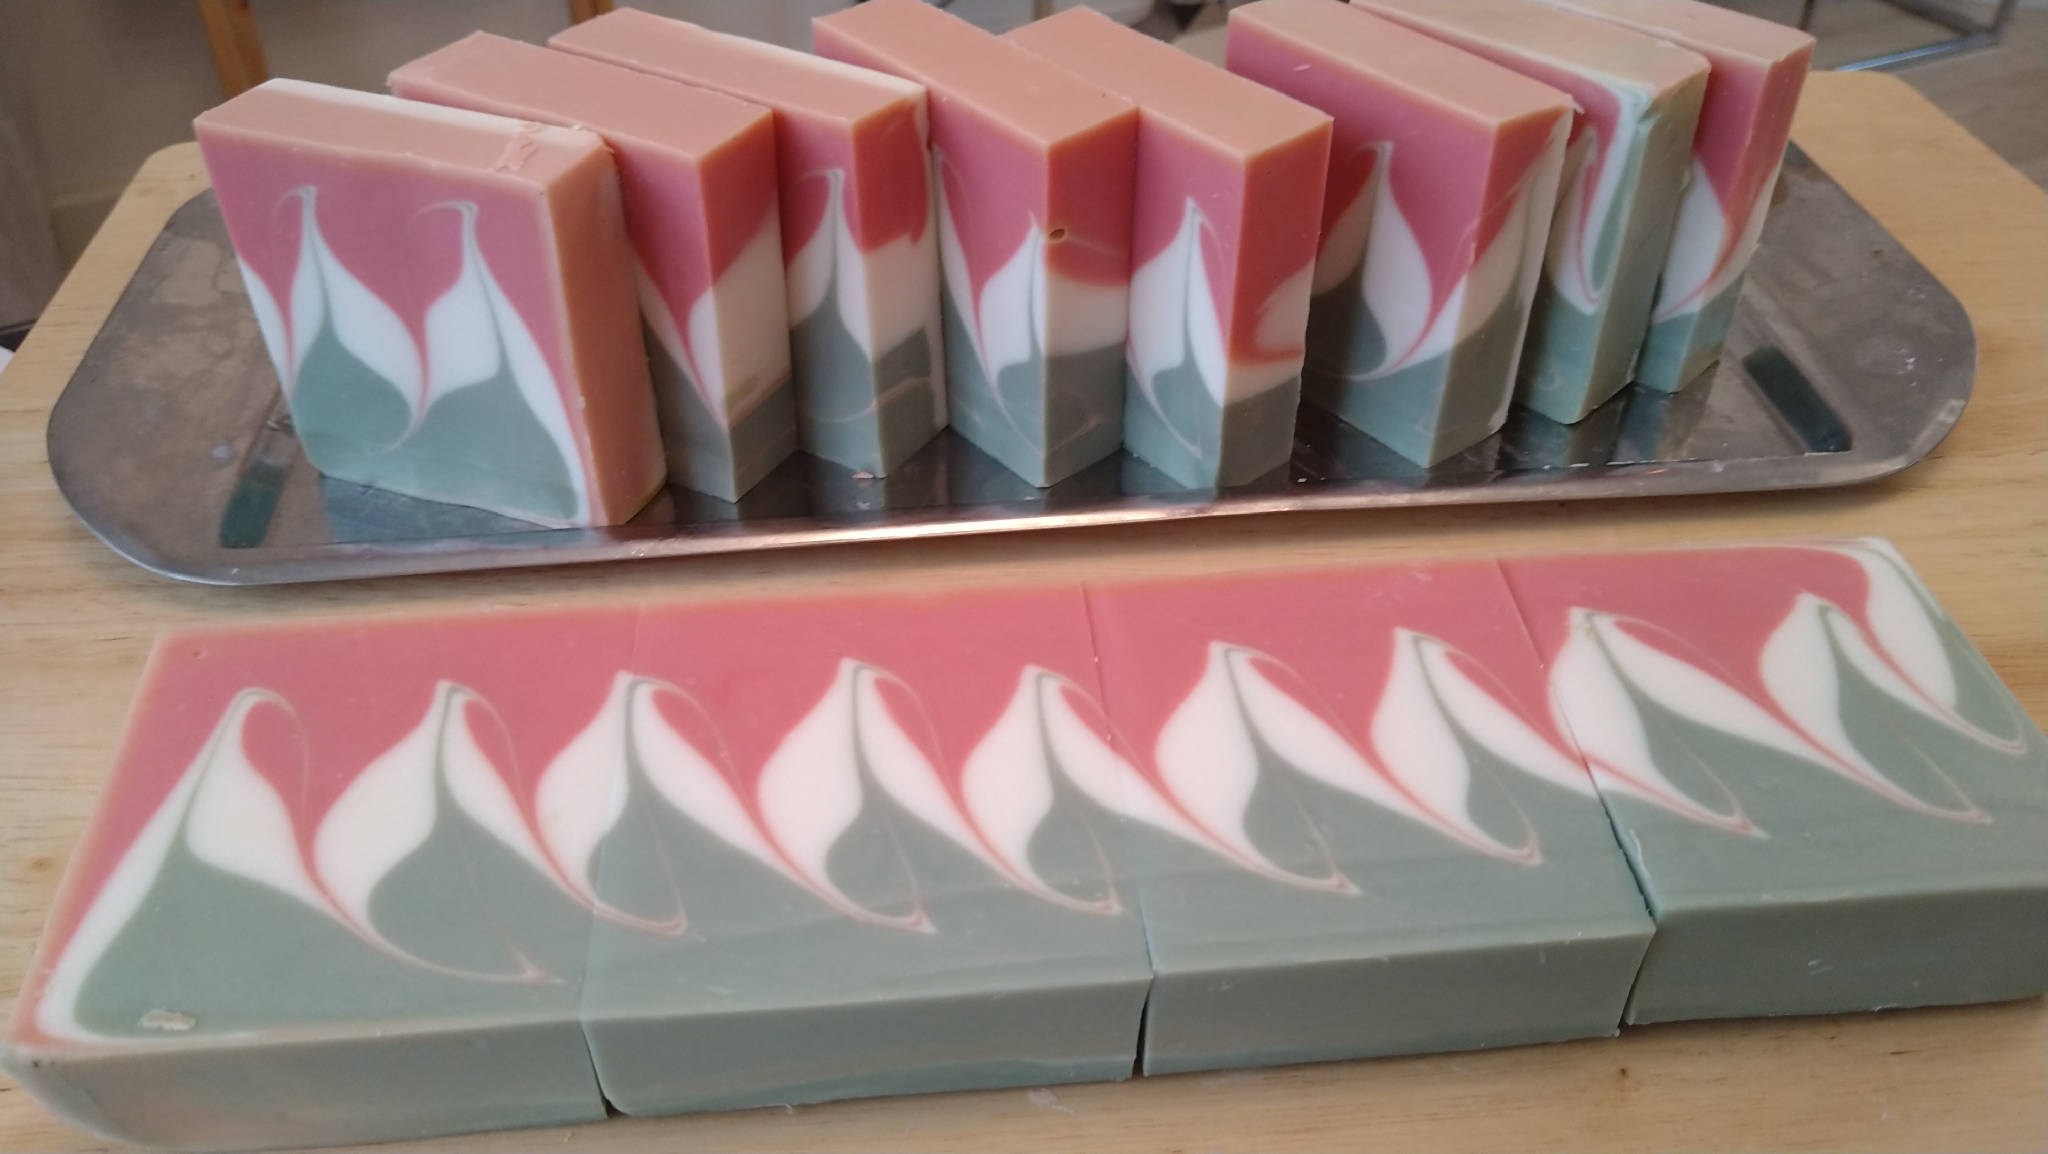 The Peppermint Patch soap